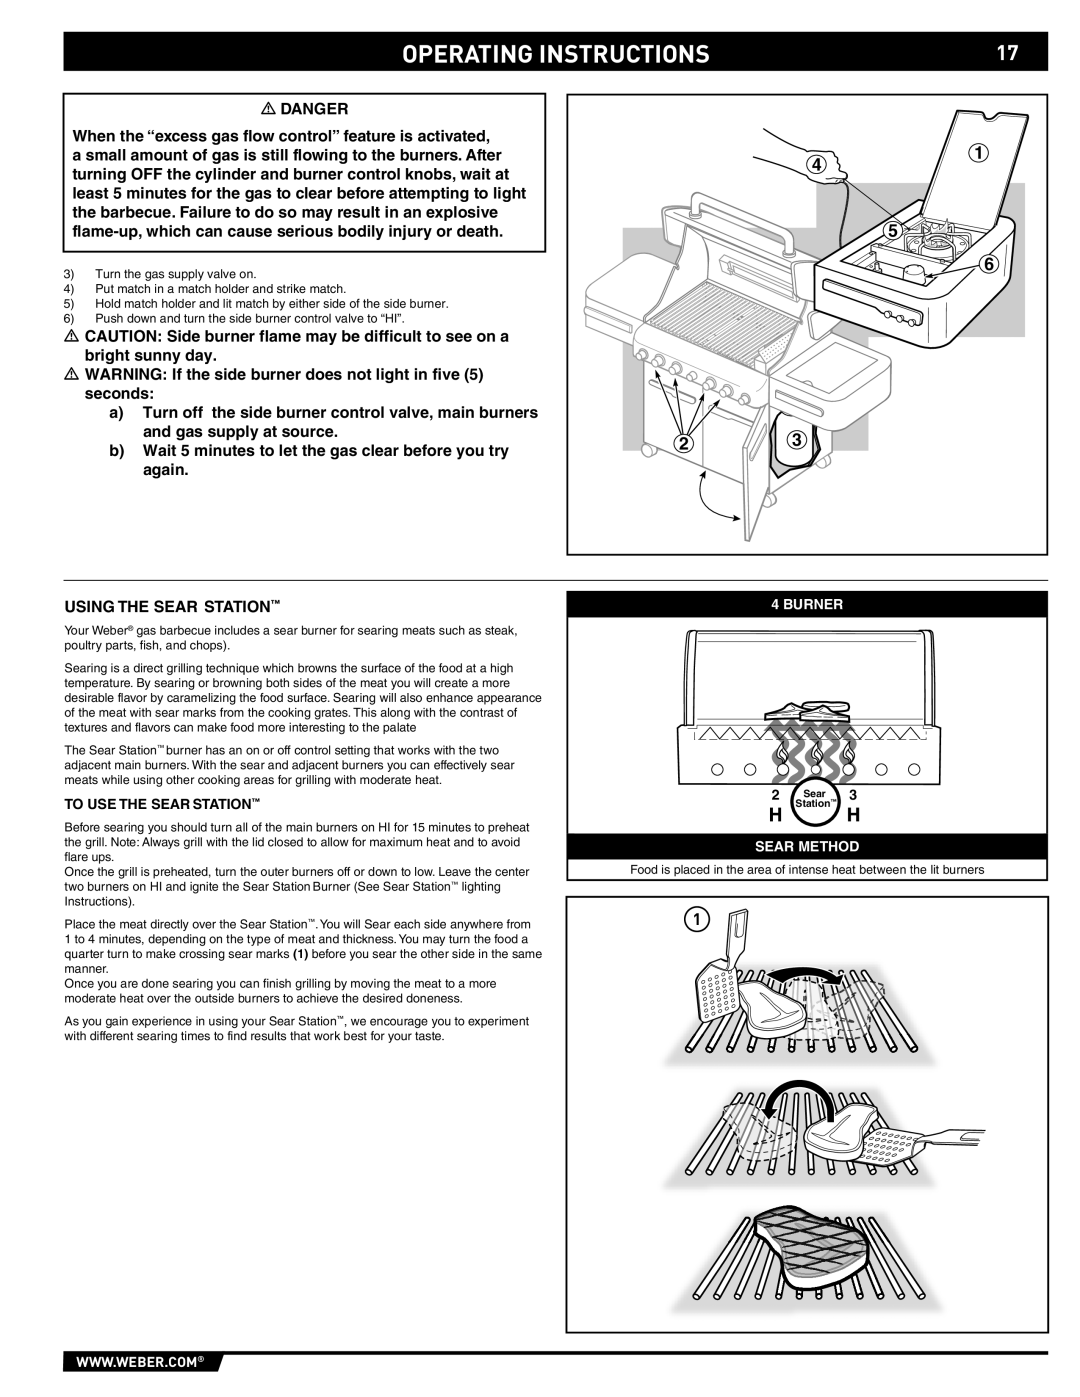 Summit 89190 manual Operating Instructions, To Use The Sear Station 